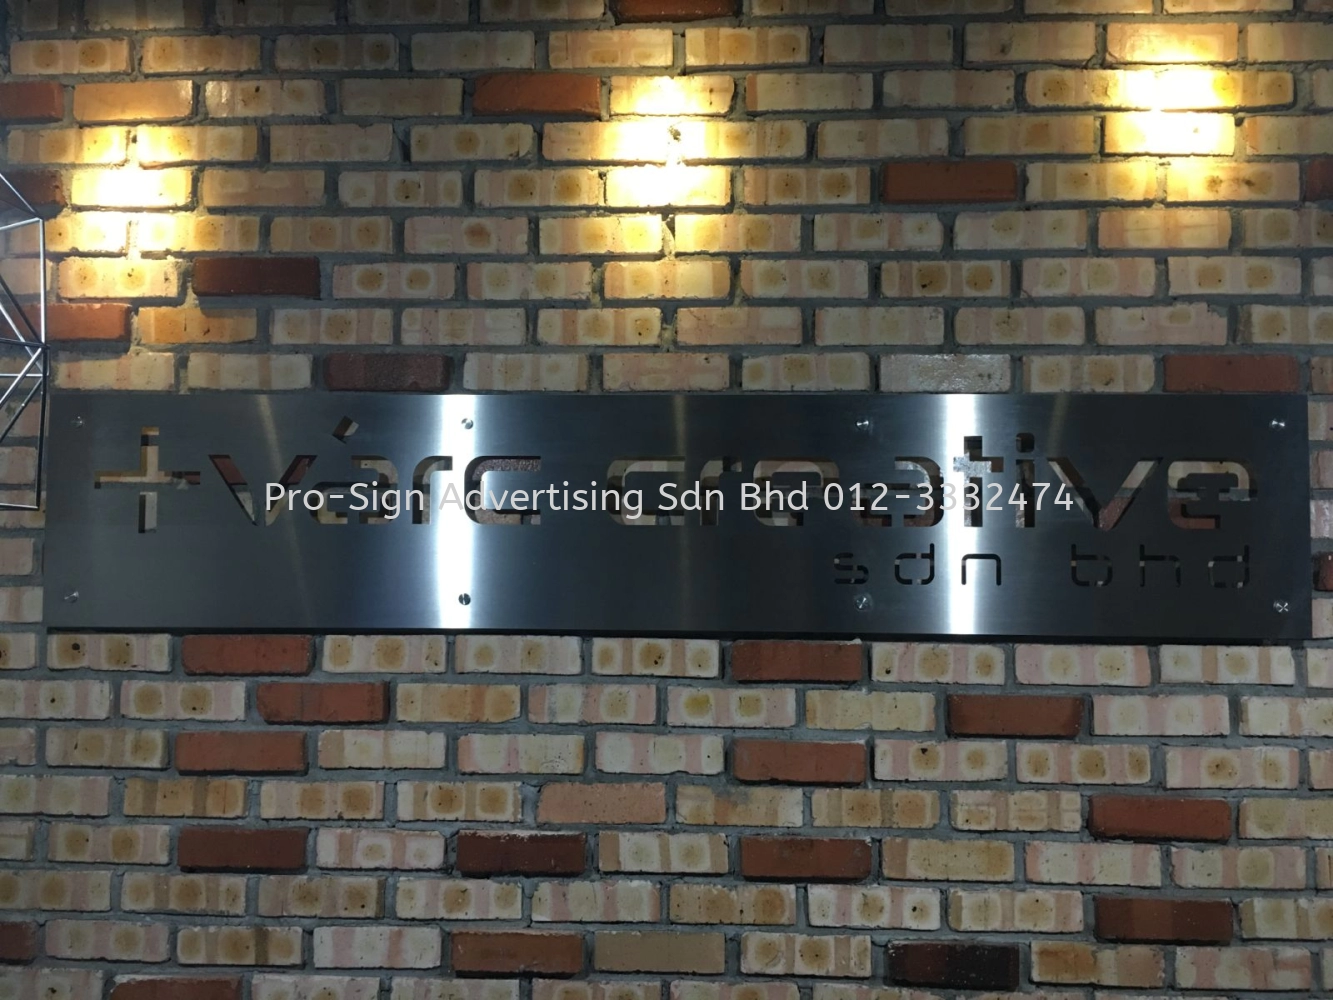 HAIRLINE STAINLESS STEEL LASER CUT OUT SIGN (VARC CREATIVE, KL, 2019)